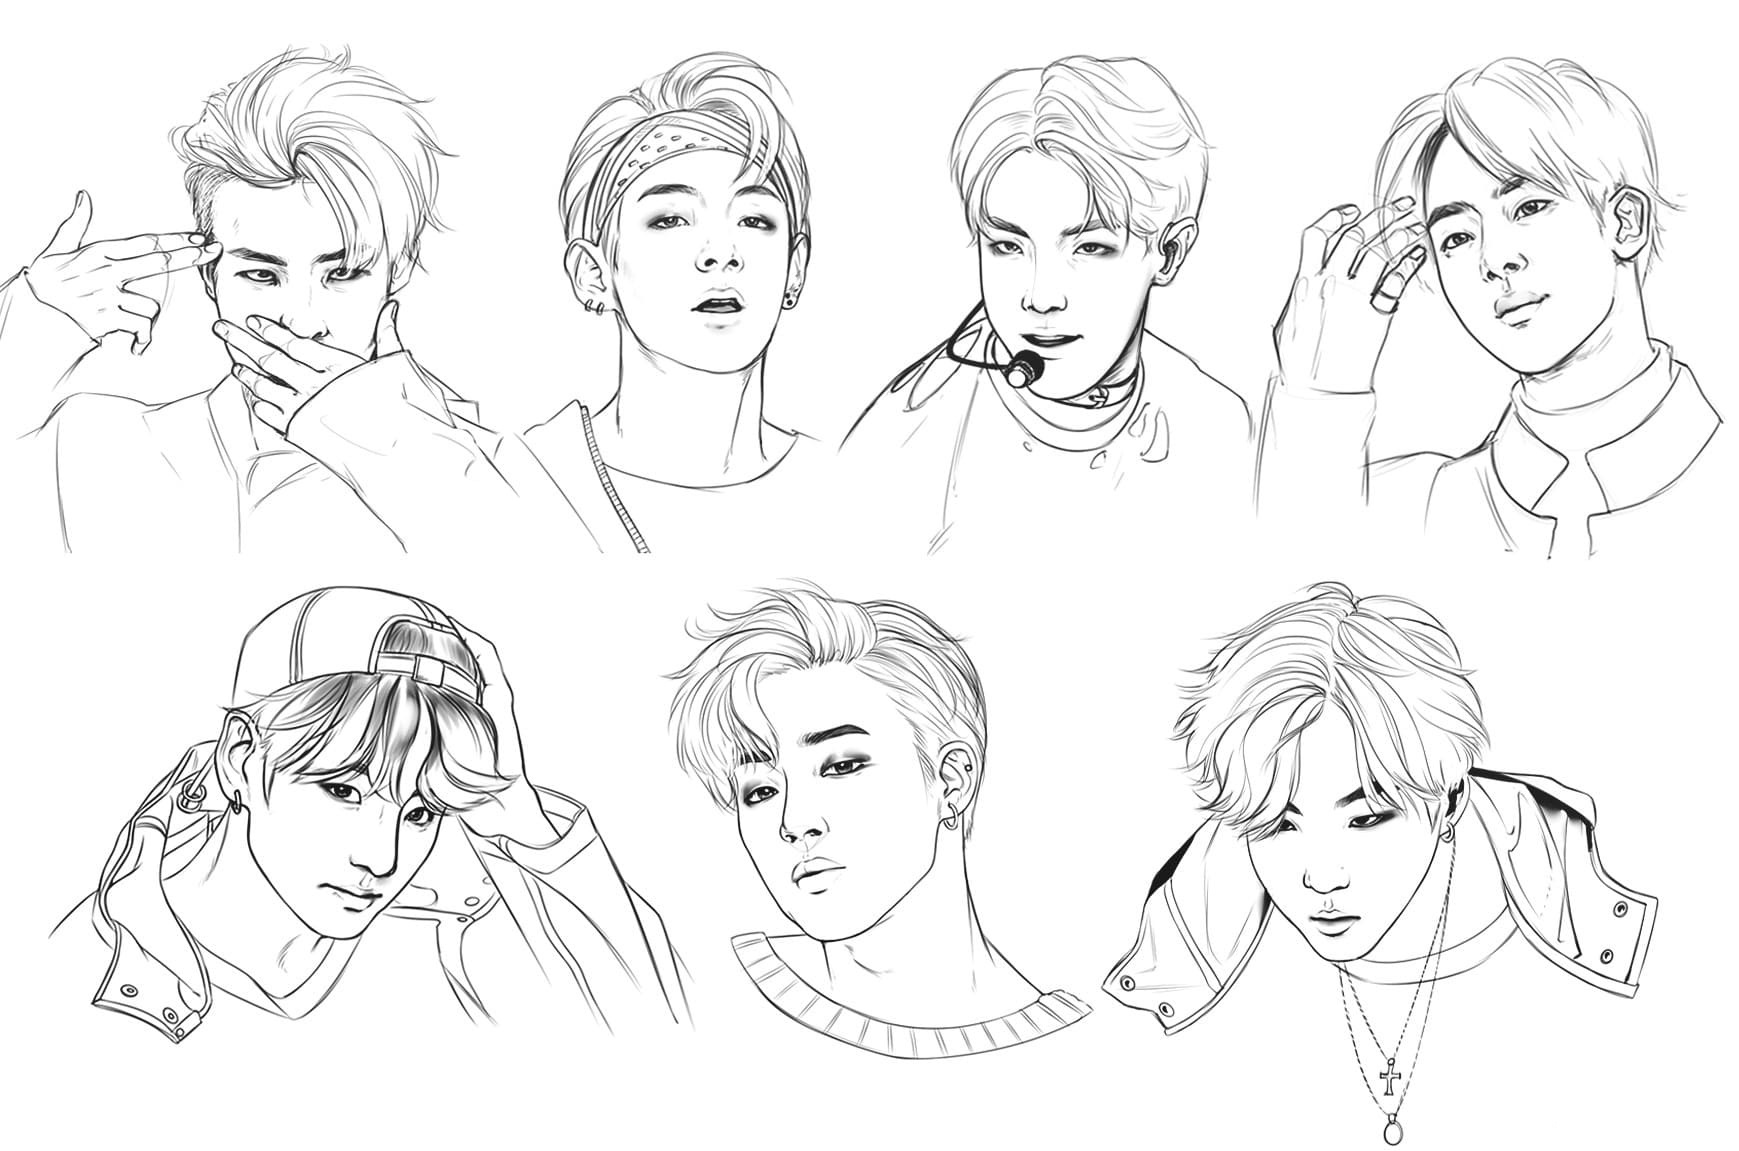 BTS Coloring Pages   Free Printable Members of a Popular Korean Group